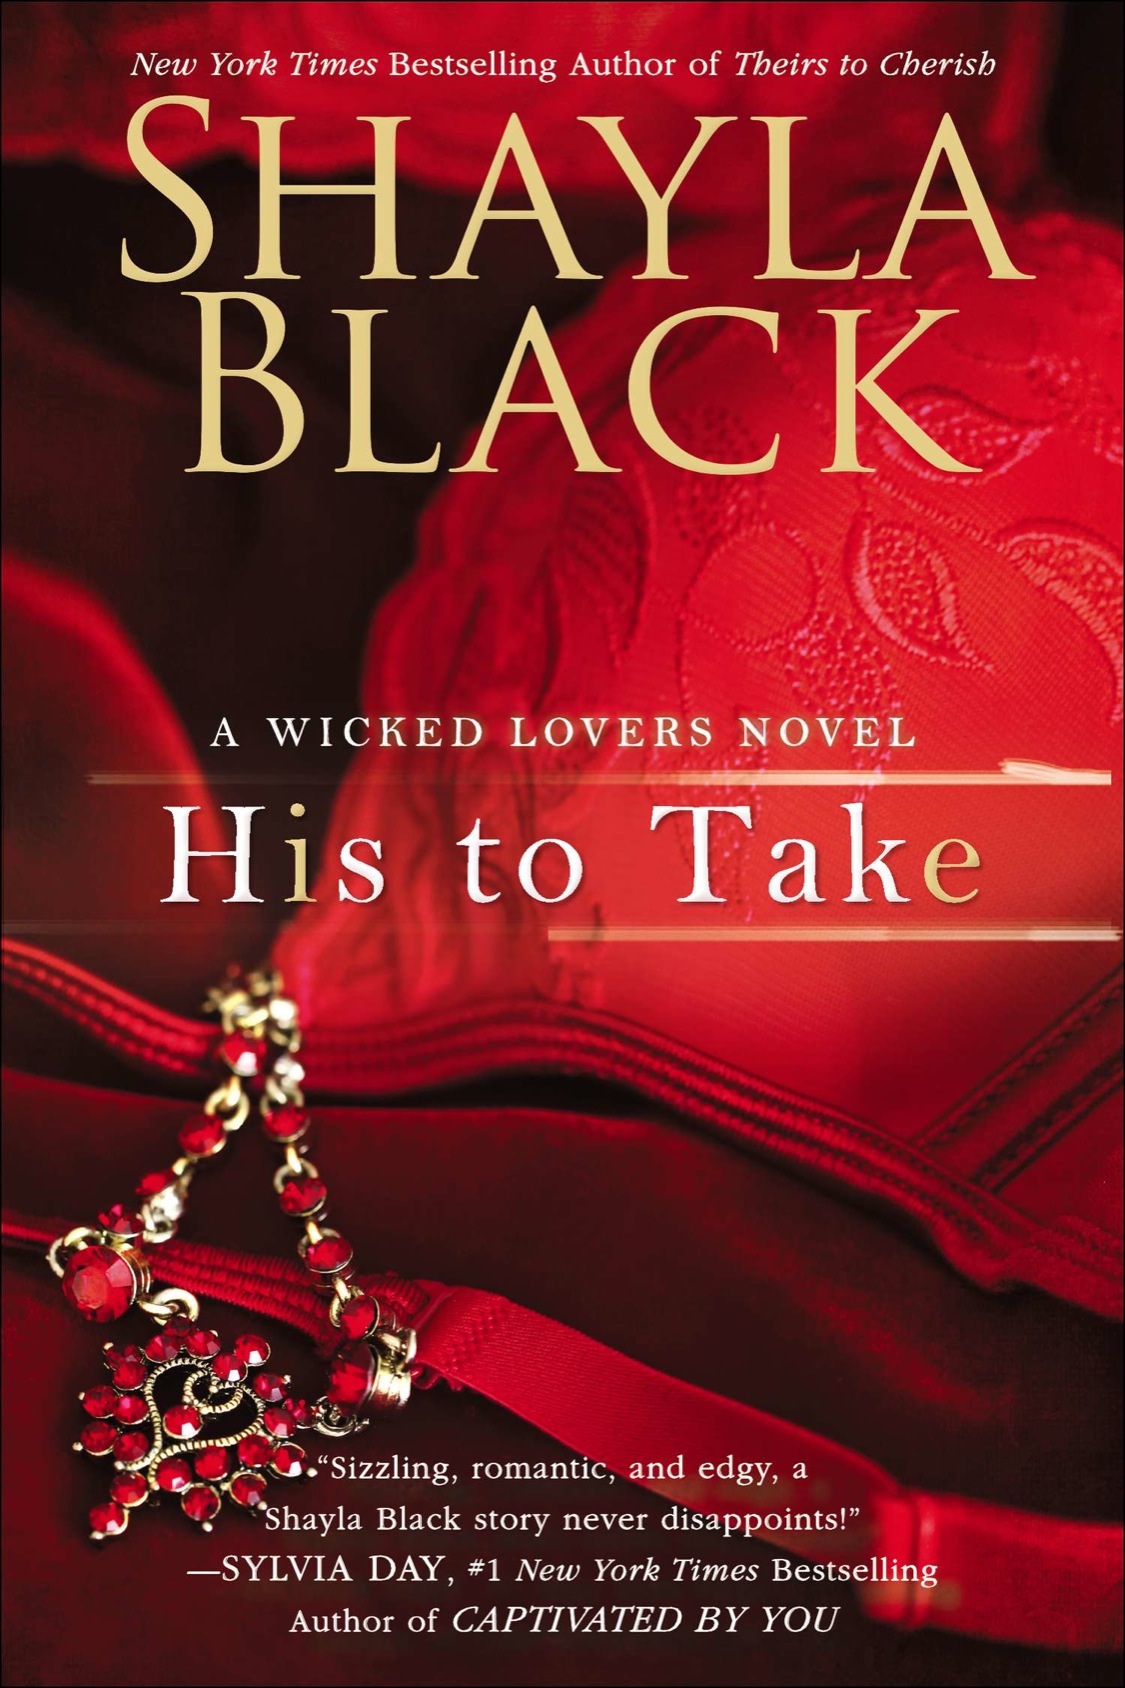 His to Take (2015) by Shayla Black